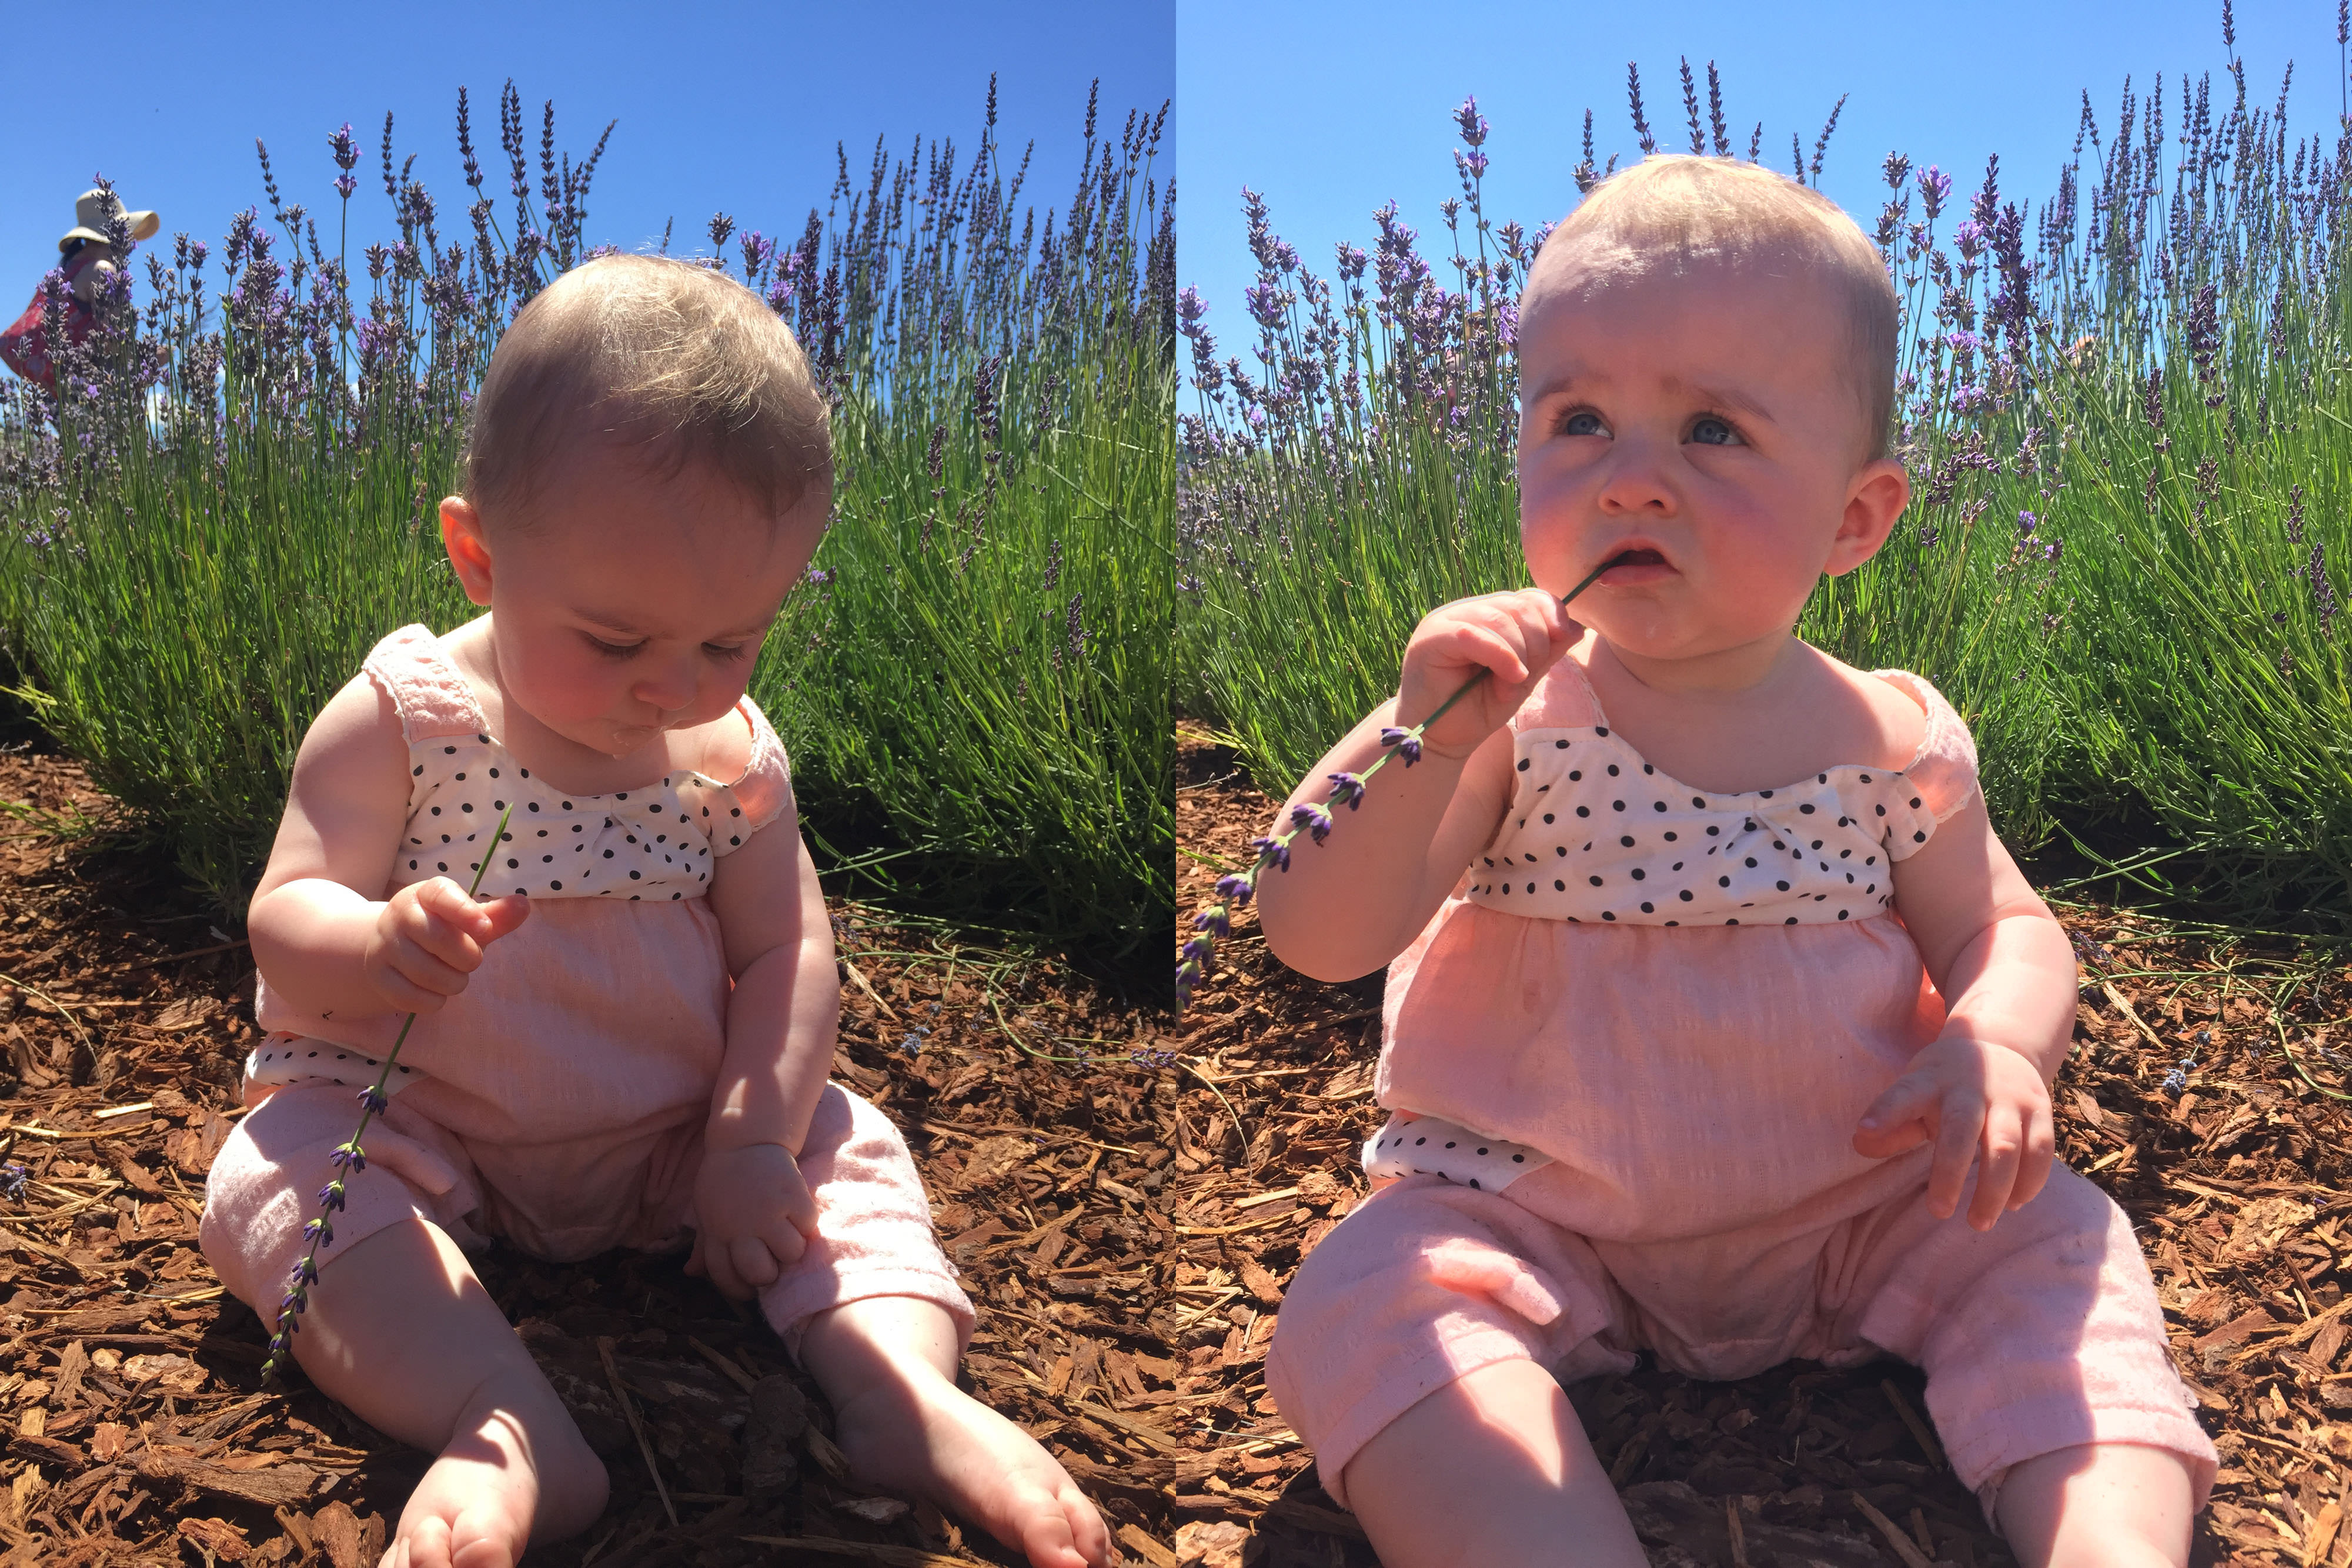 Two side-by-side photos of a baby sitting in front of a field of lavender; in the left photo the baby is holding a sprig of lavender; in the right photo the baby is chewing on a sprig of lavender.